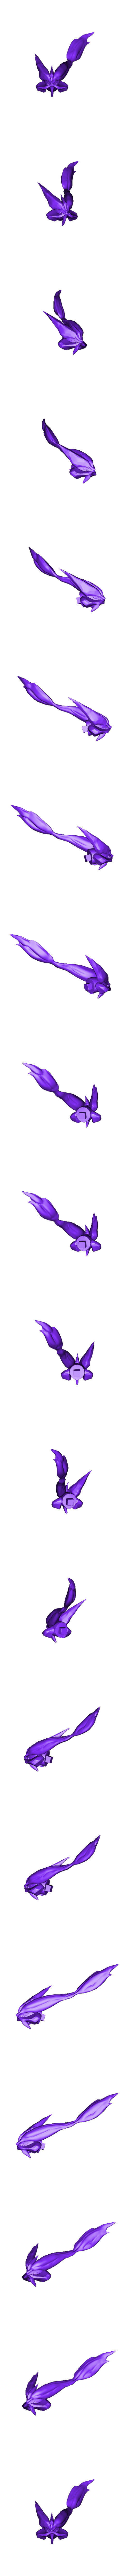 head.obj Download OBJ file Pokemon - White Kyurem(with cuts and as a whole)(2 versions) • 3D printer template, ErickFontoura3D